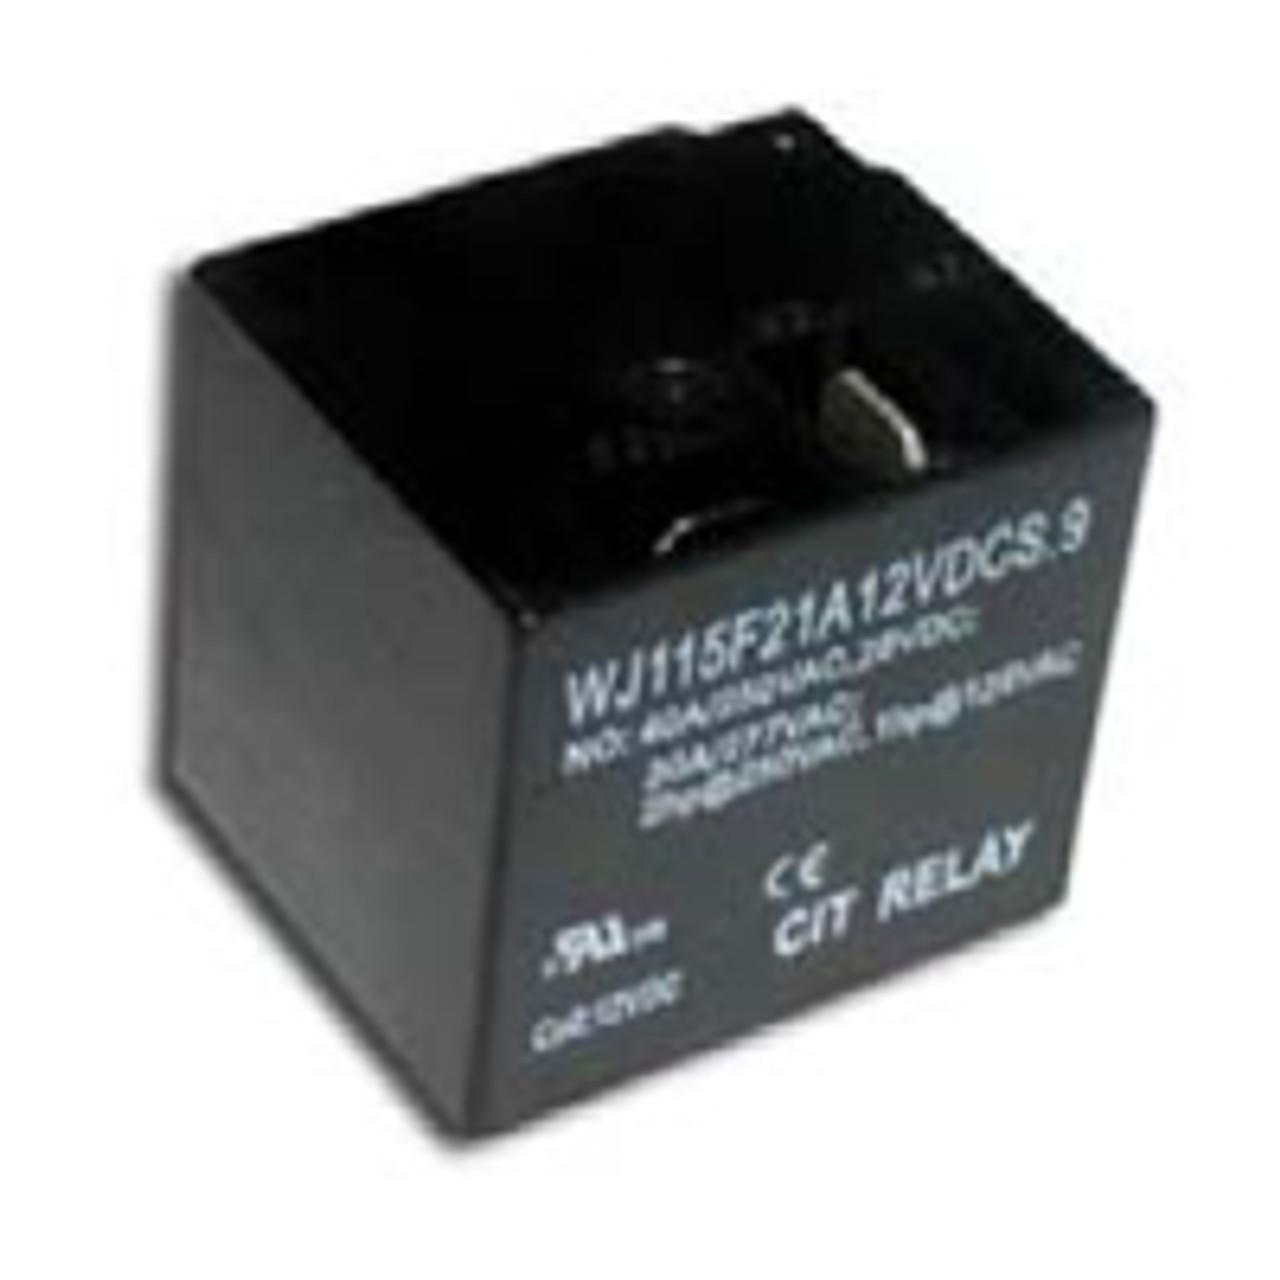 CIT Relay and Switch J115F21A9VDCS.6U Power Relays